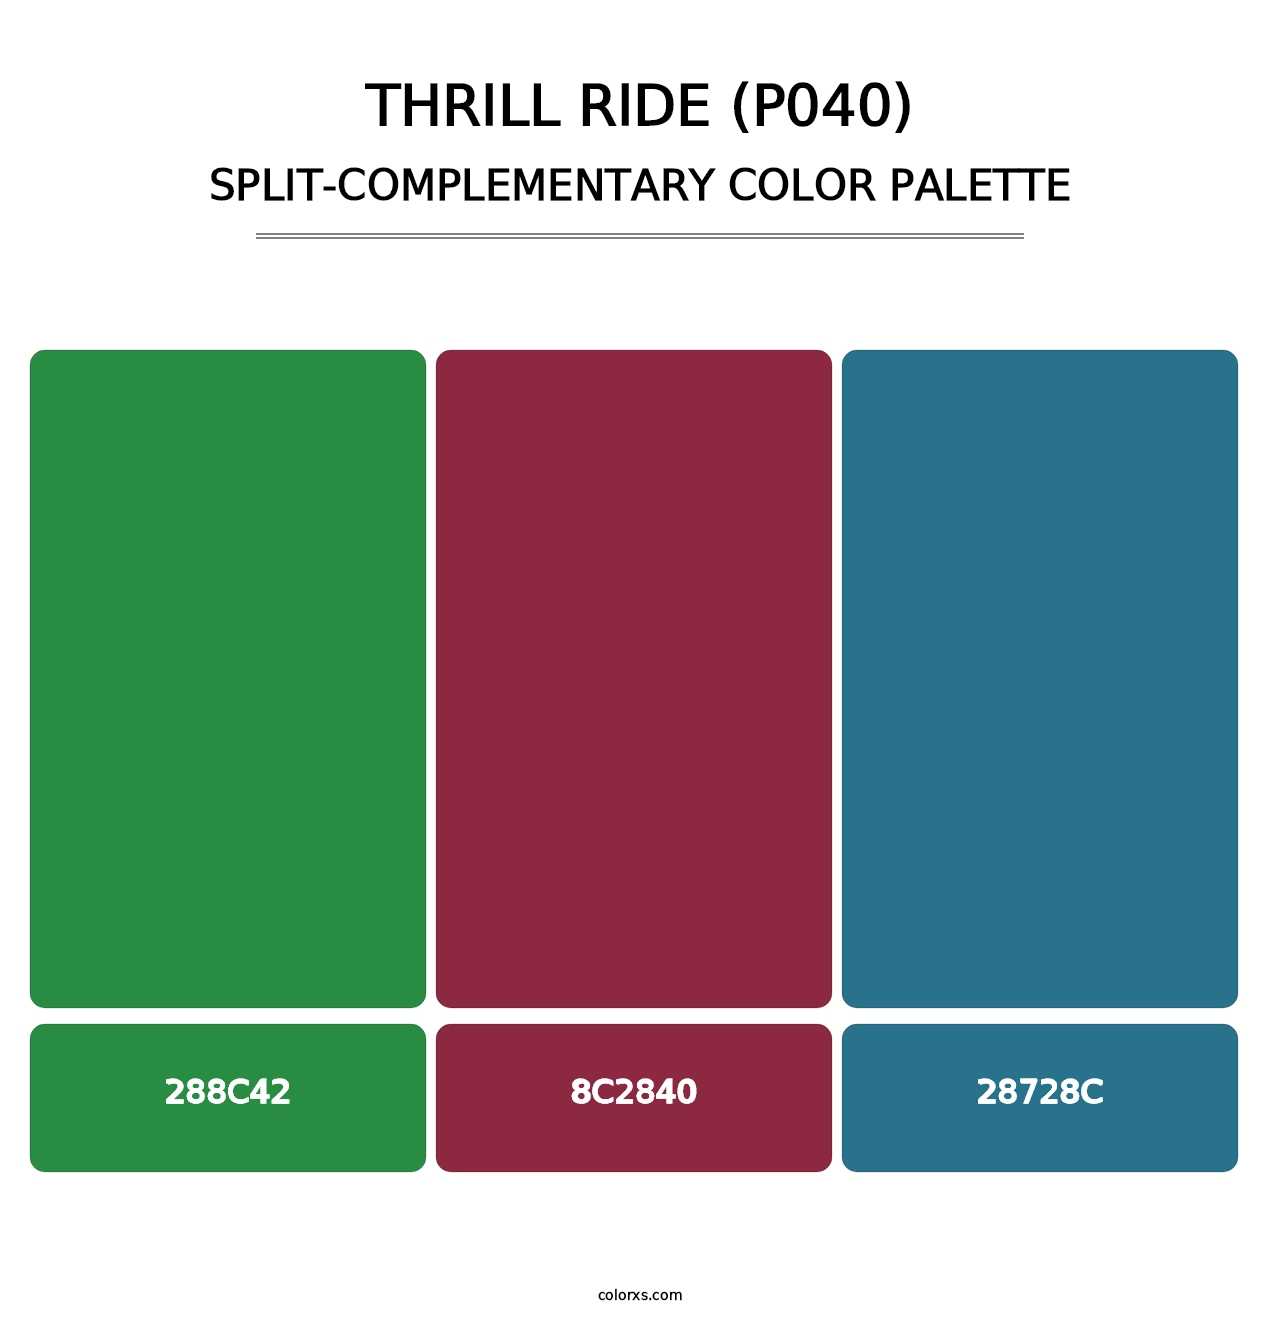 Thrill Ride (P040) - Split-Complementary Color Palette